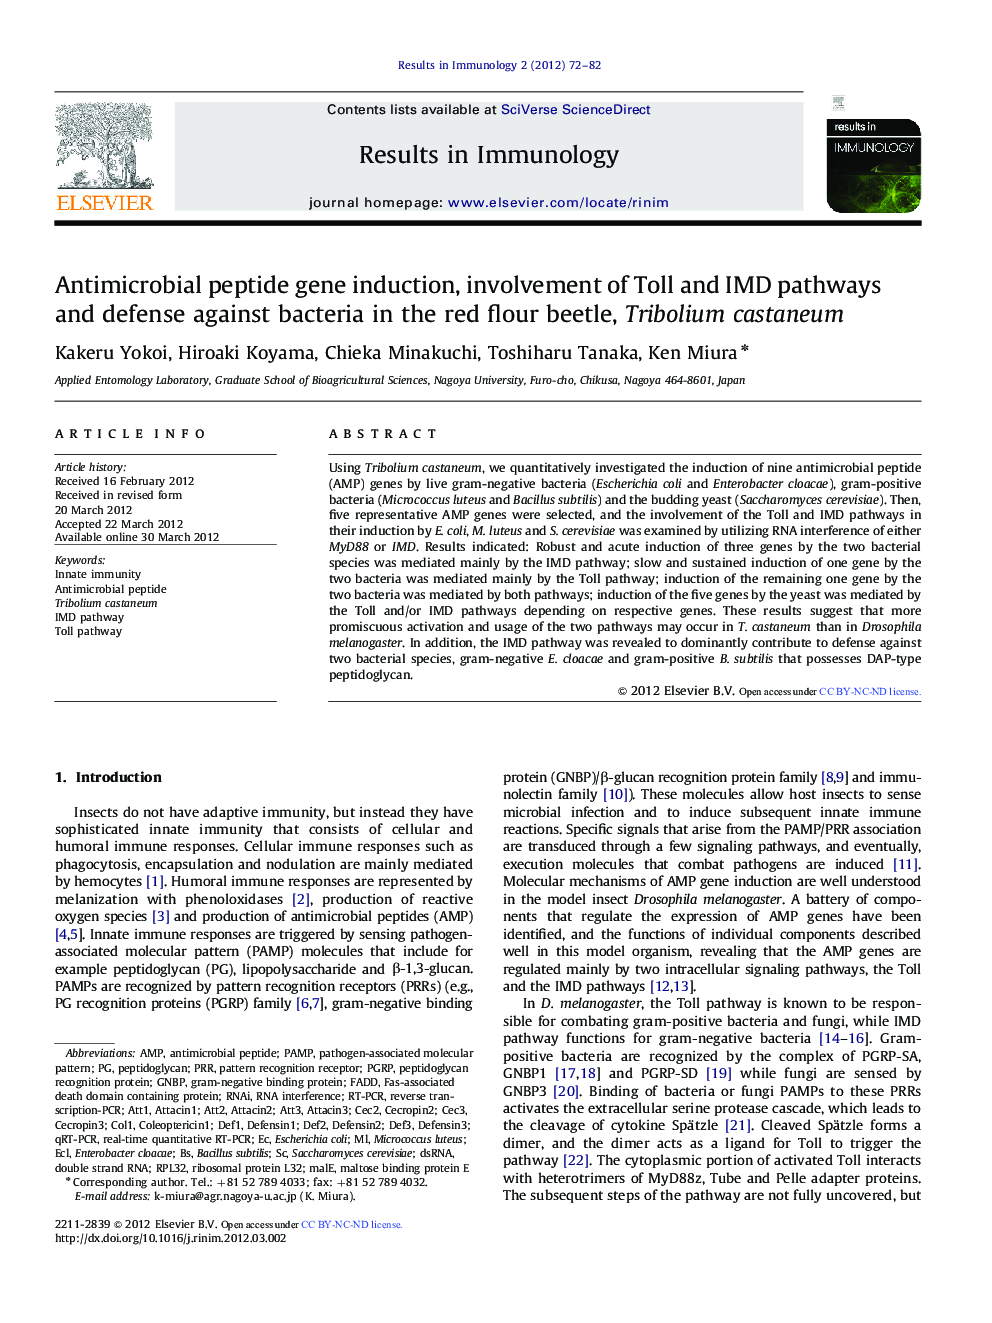 Antimicrobial peptide gene induction, involvement of Toll and IMD pathways and defense against bacteria in the red flour beetle, Tribolium castaneum